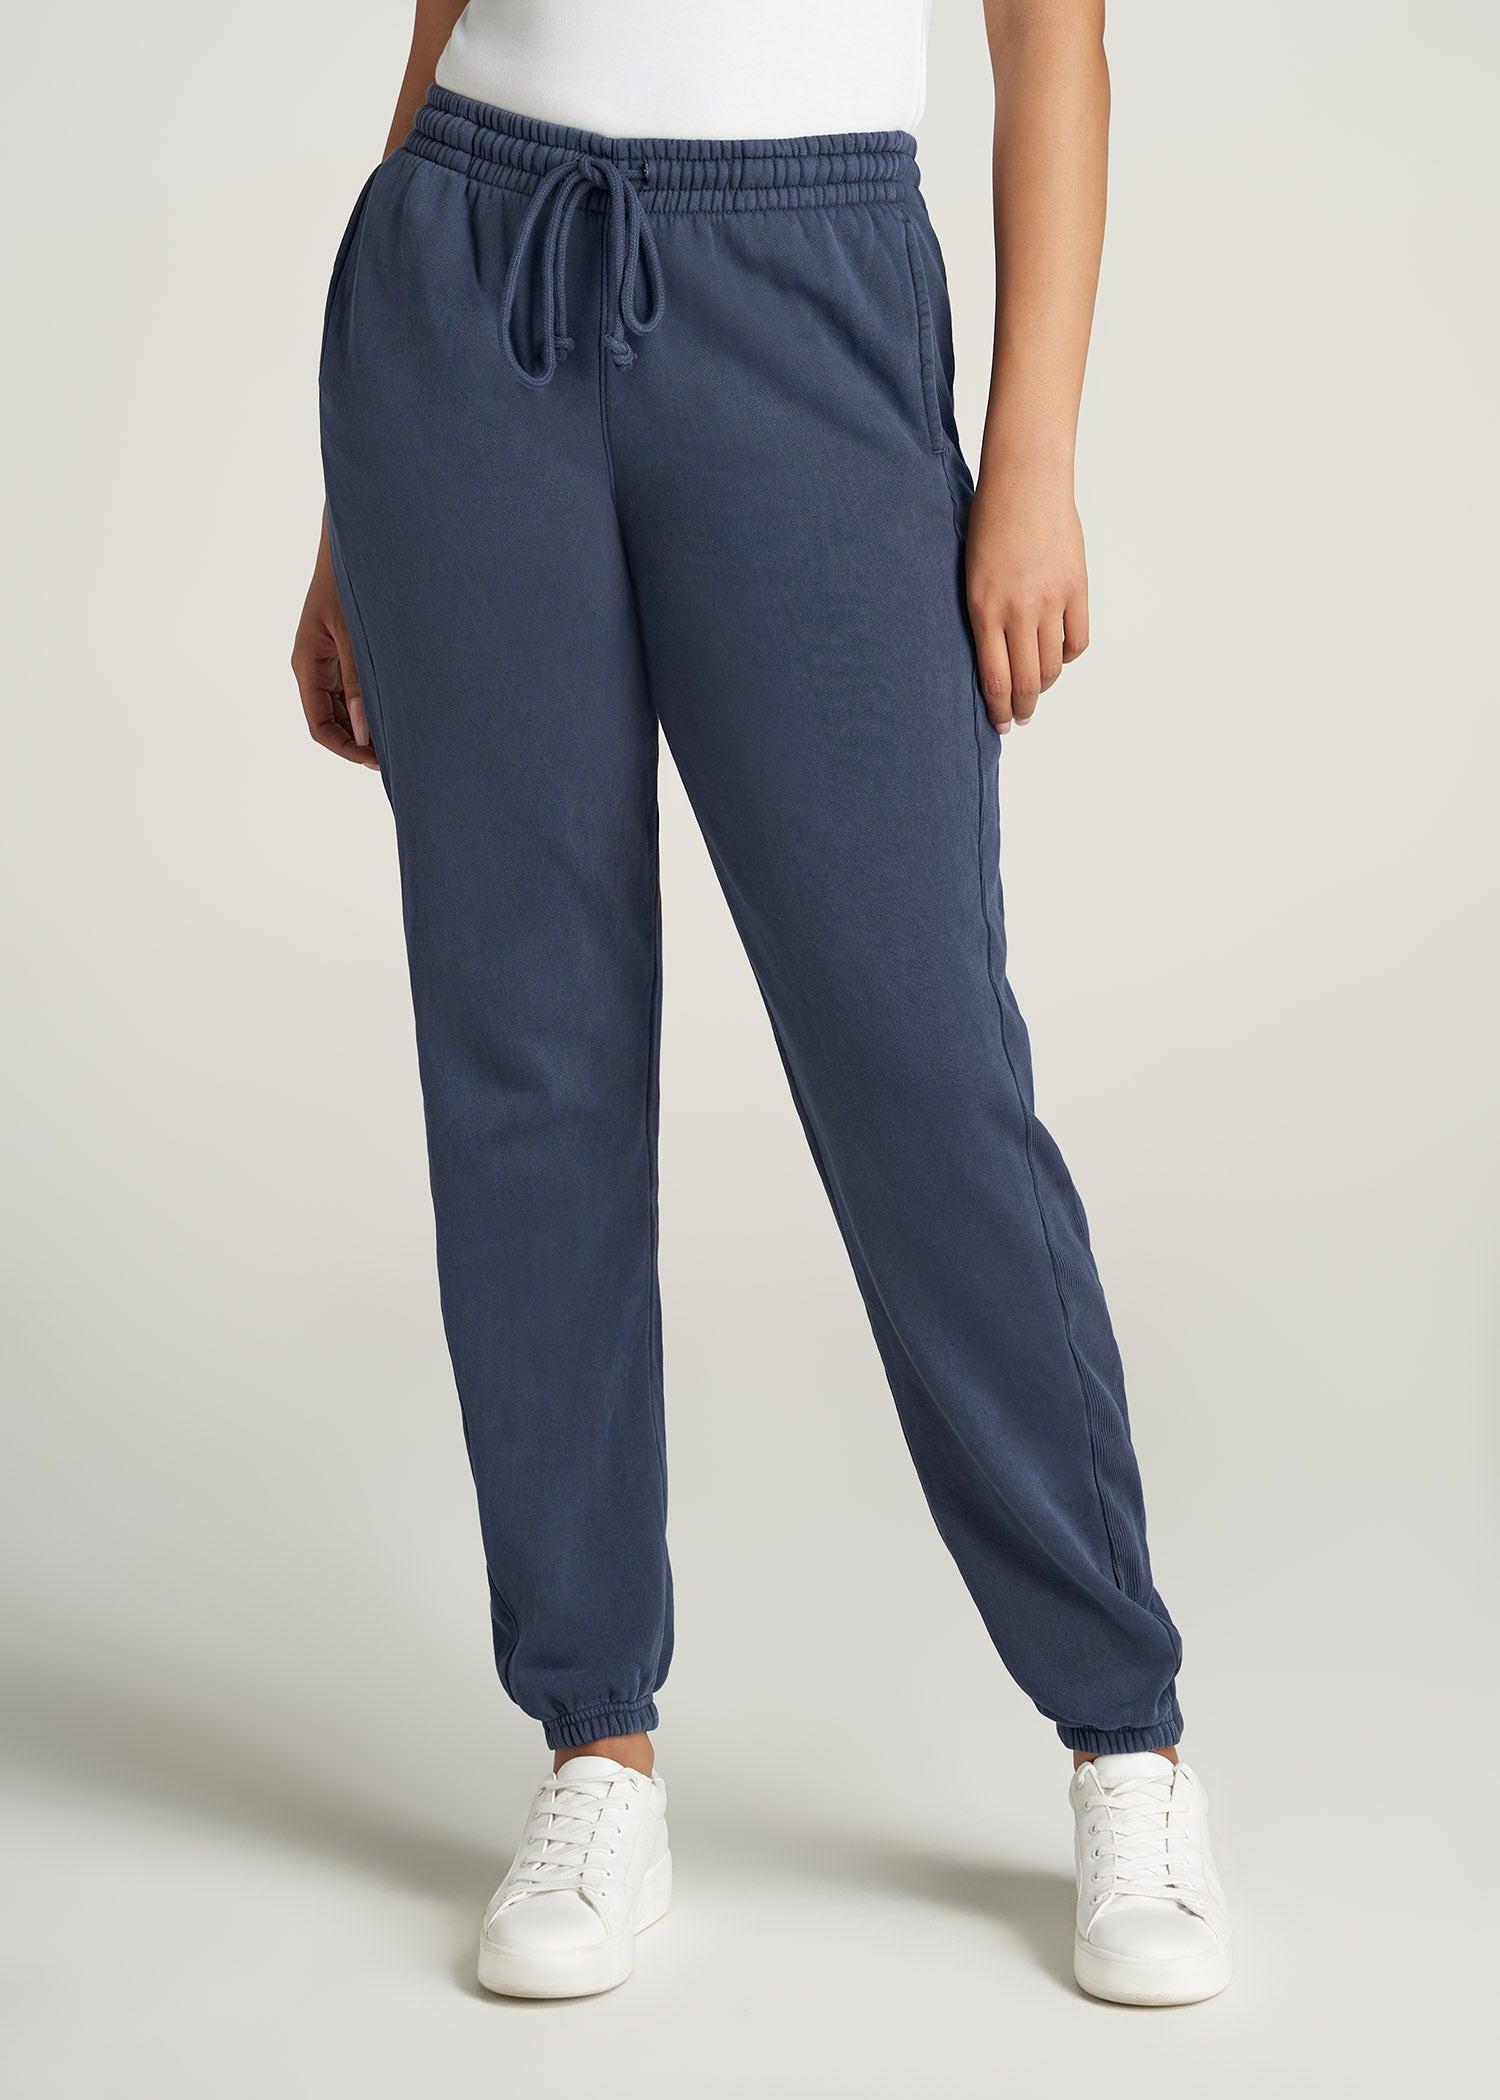 Plus Size Joggers and Sweatpants, Everyday Low Prices